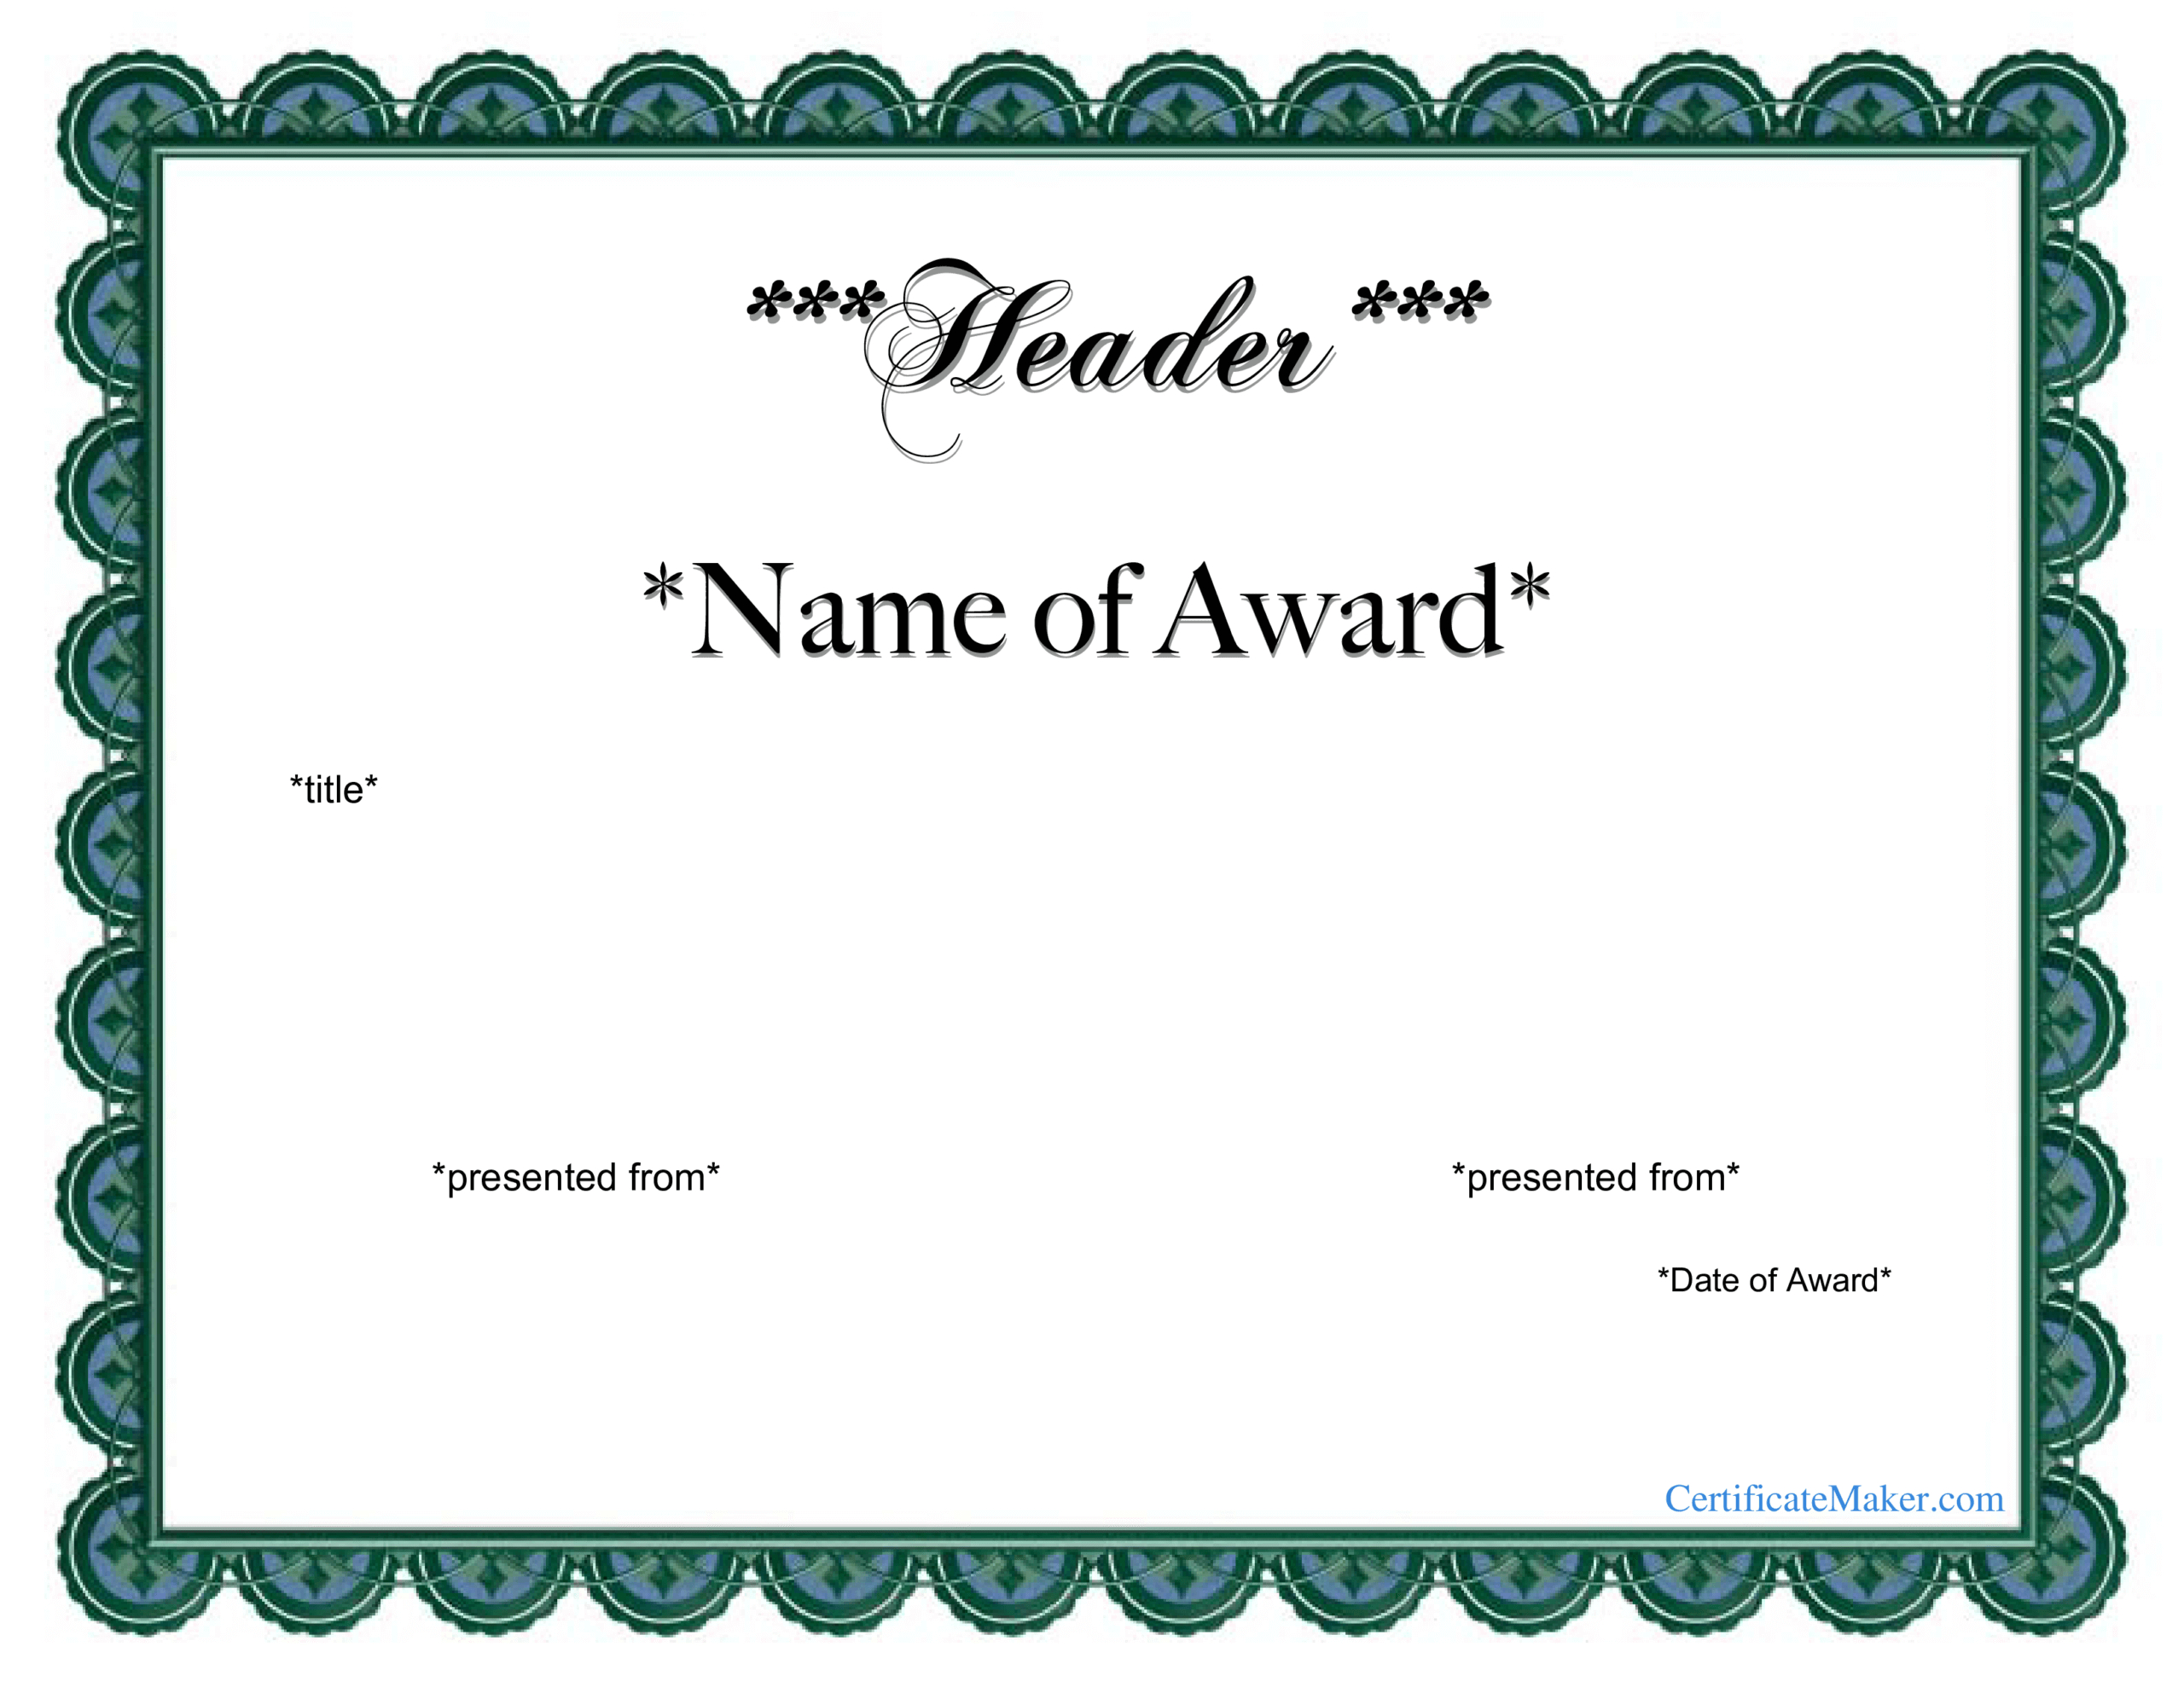 Top Diploma Certificate Template Free Download 7 Ideas